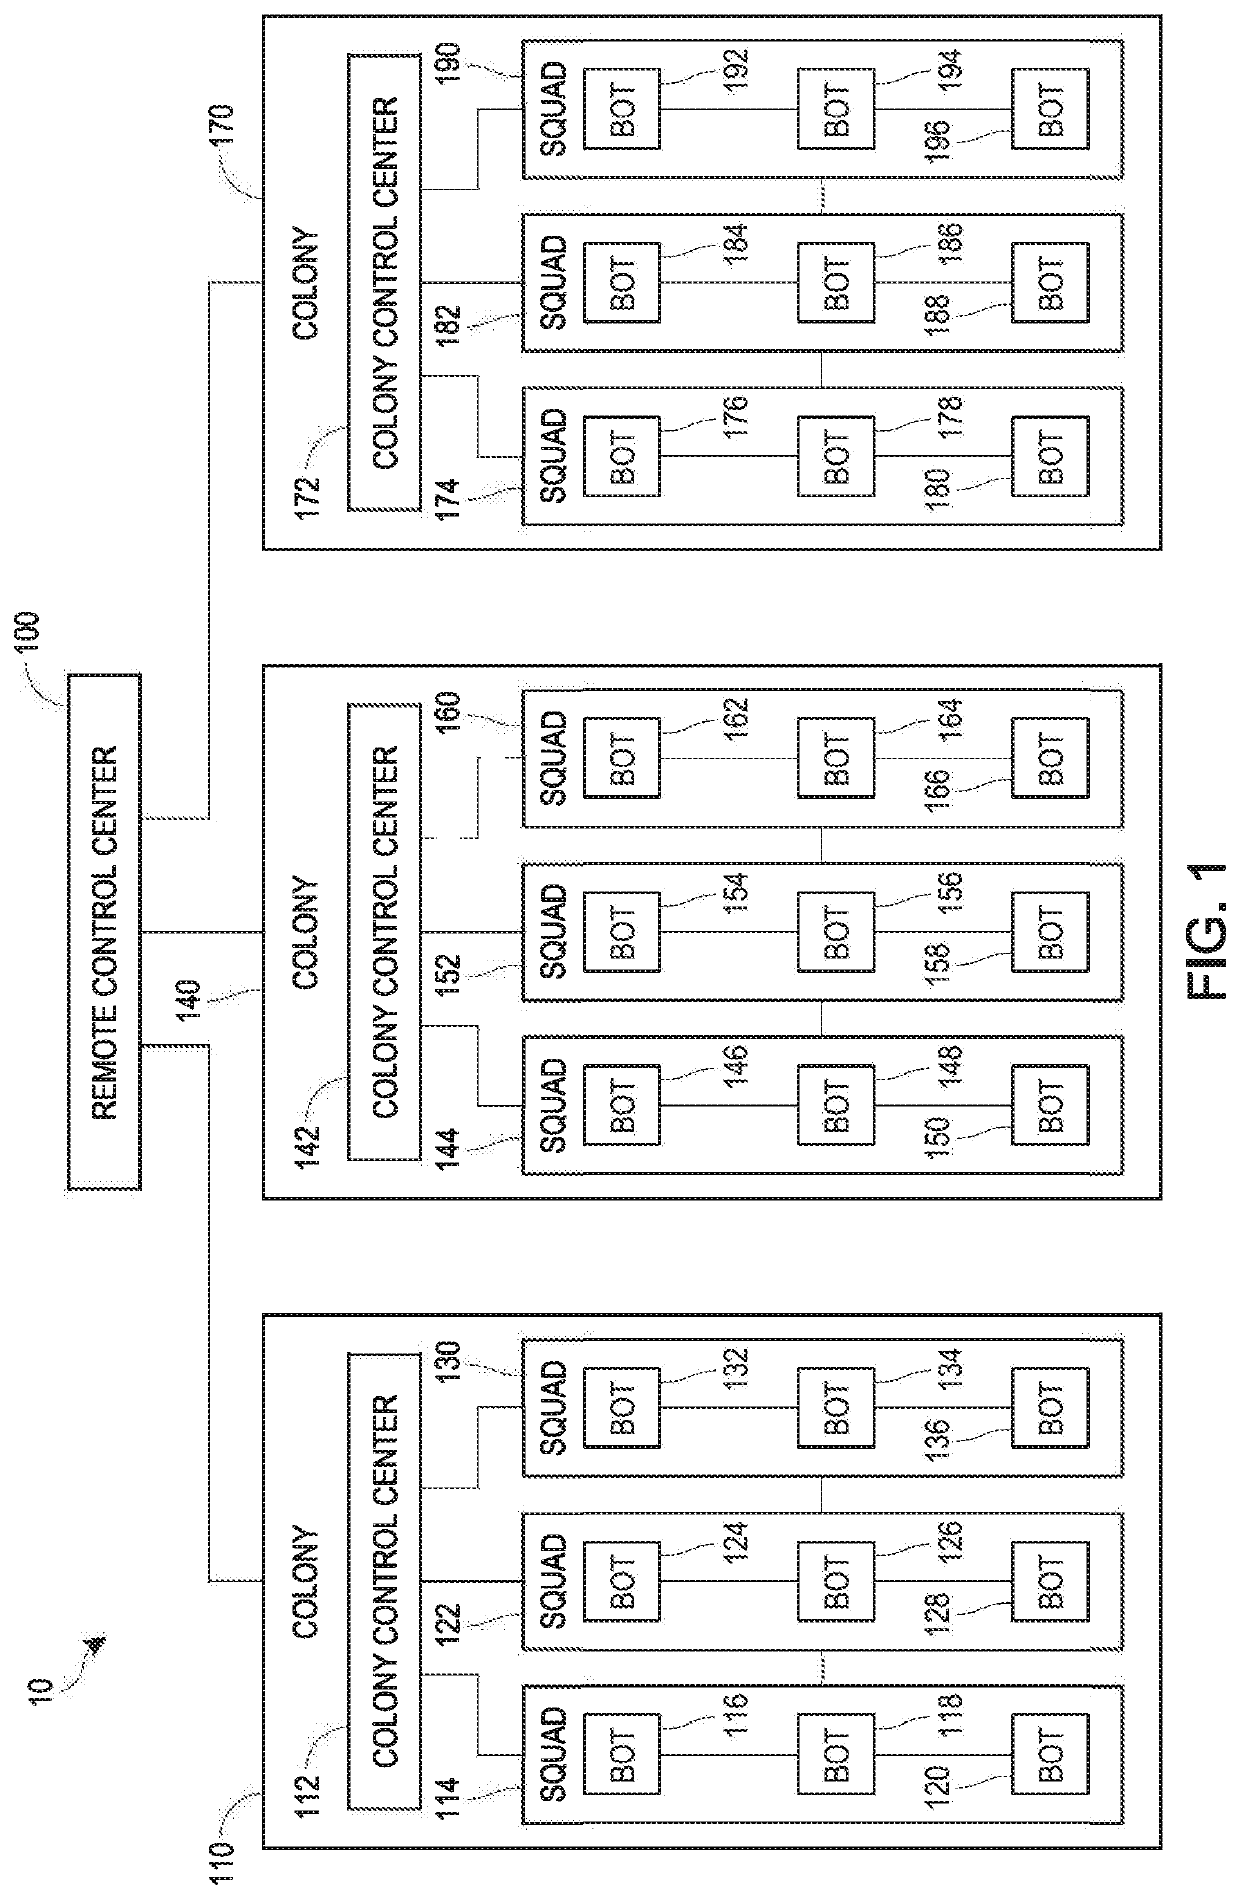 Systems and methods for industrial robotics